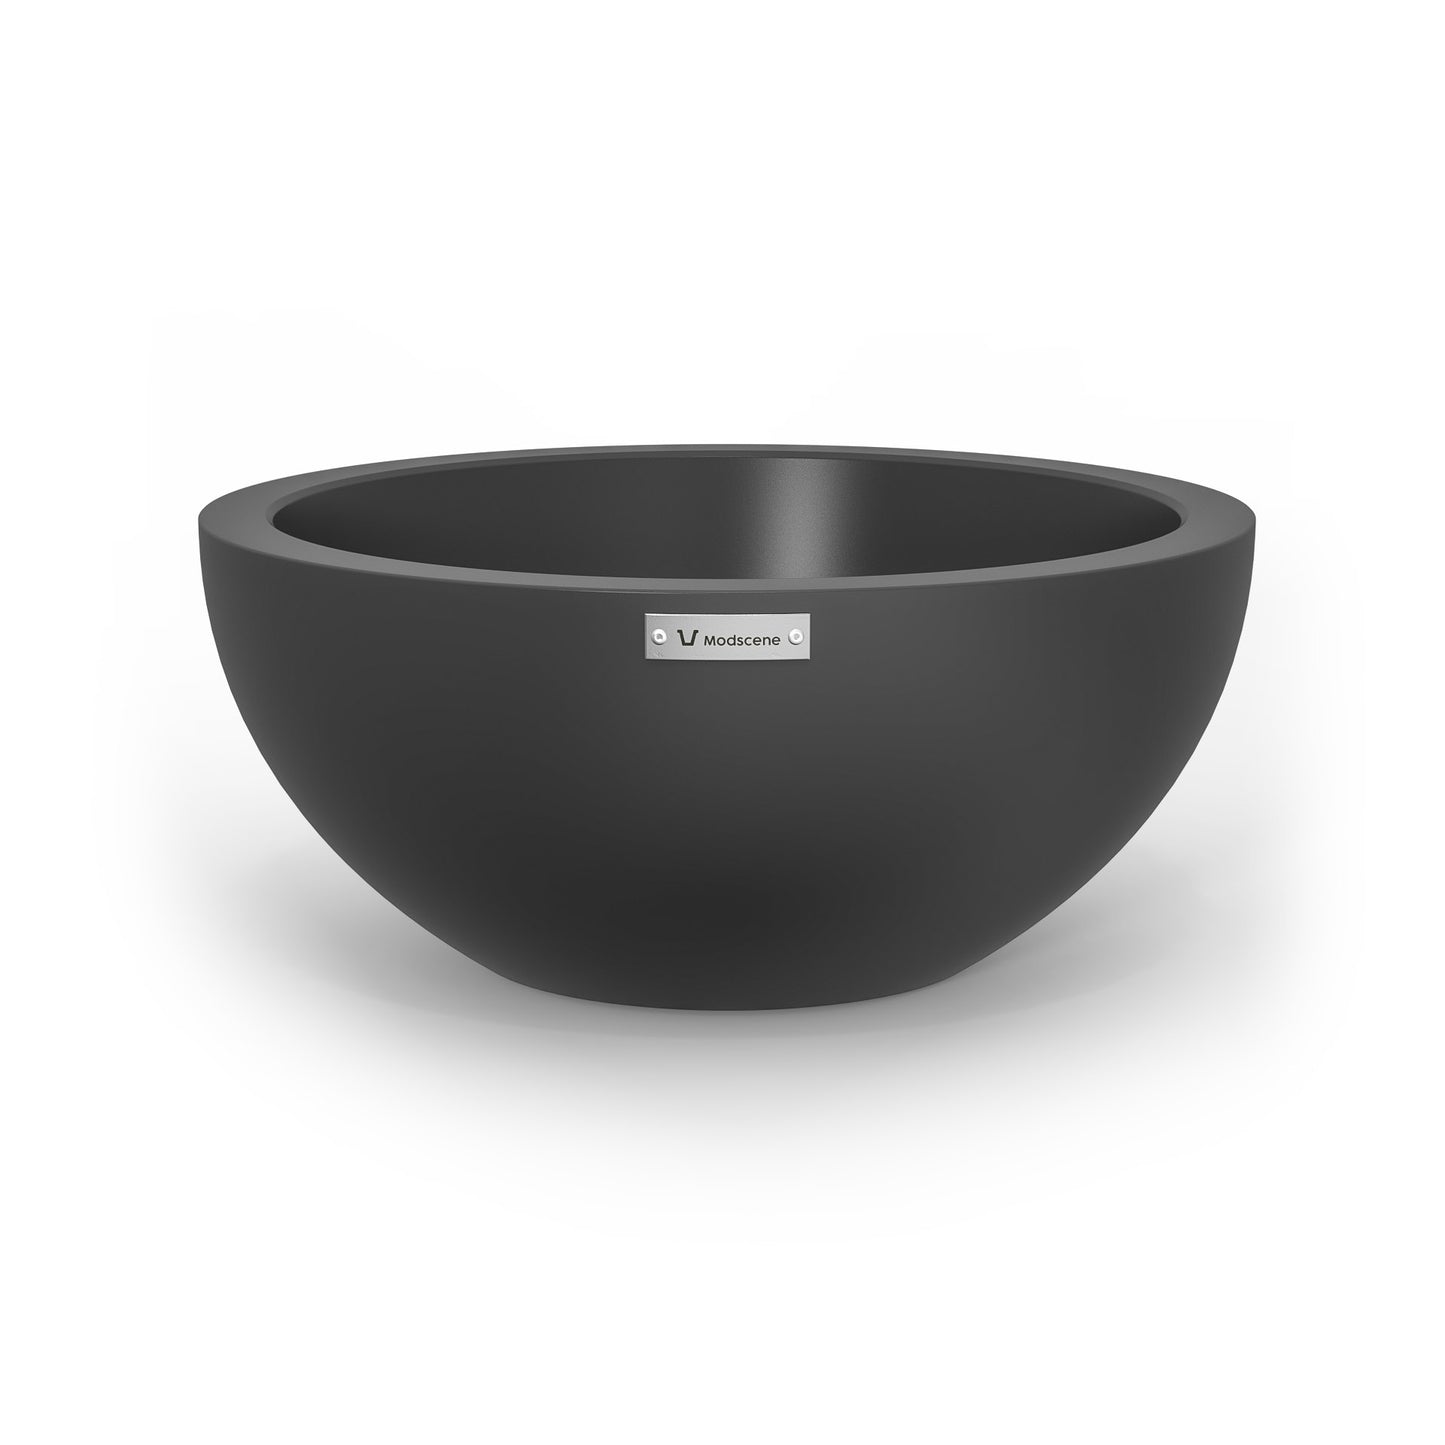 A small planter bowl in a dark grey colour made by Modscene.